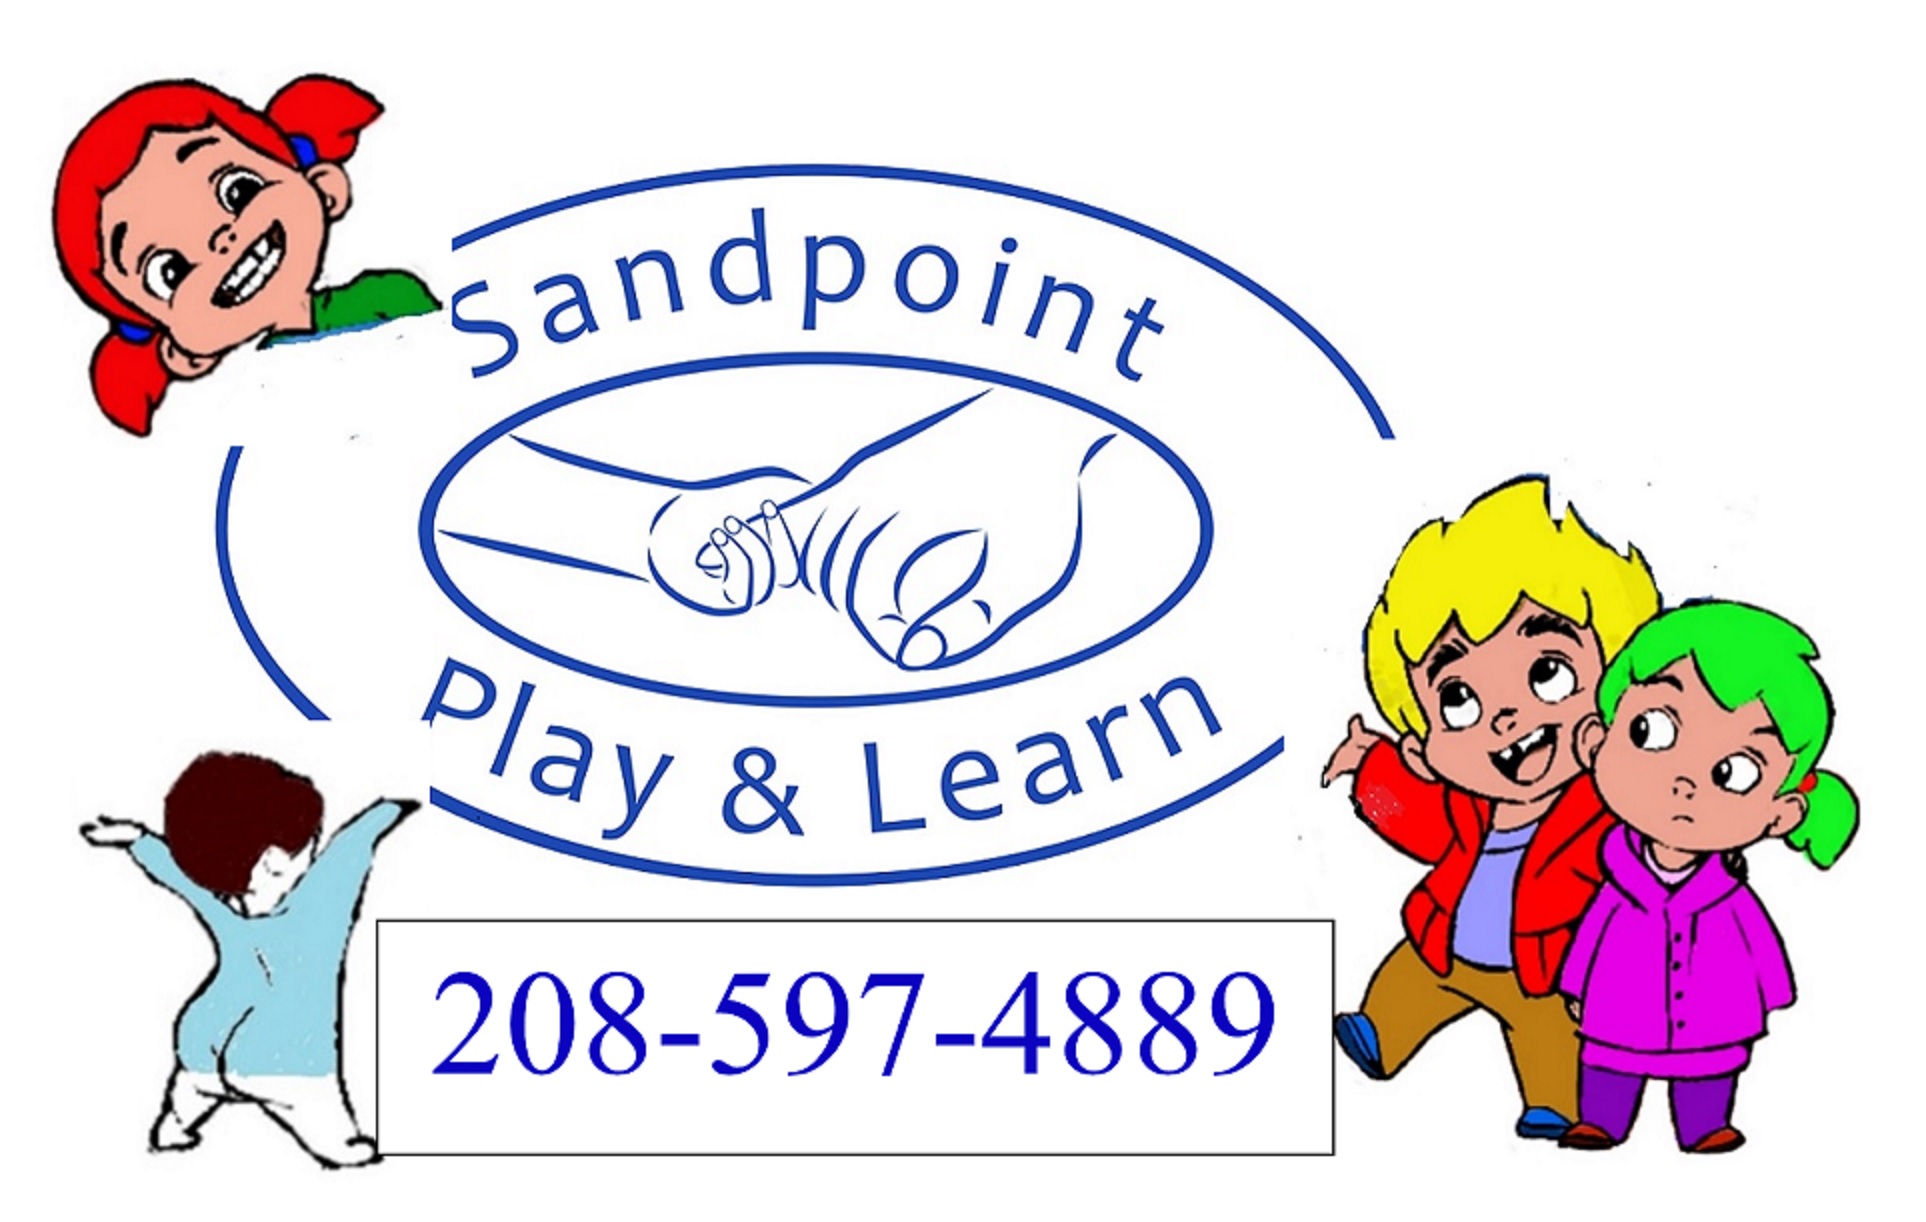 SANDPOINT PLAY AND LEARN DAYCARE CENTER LLC